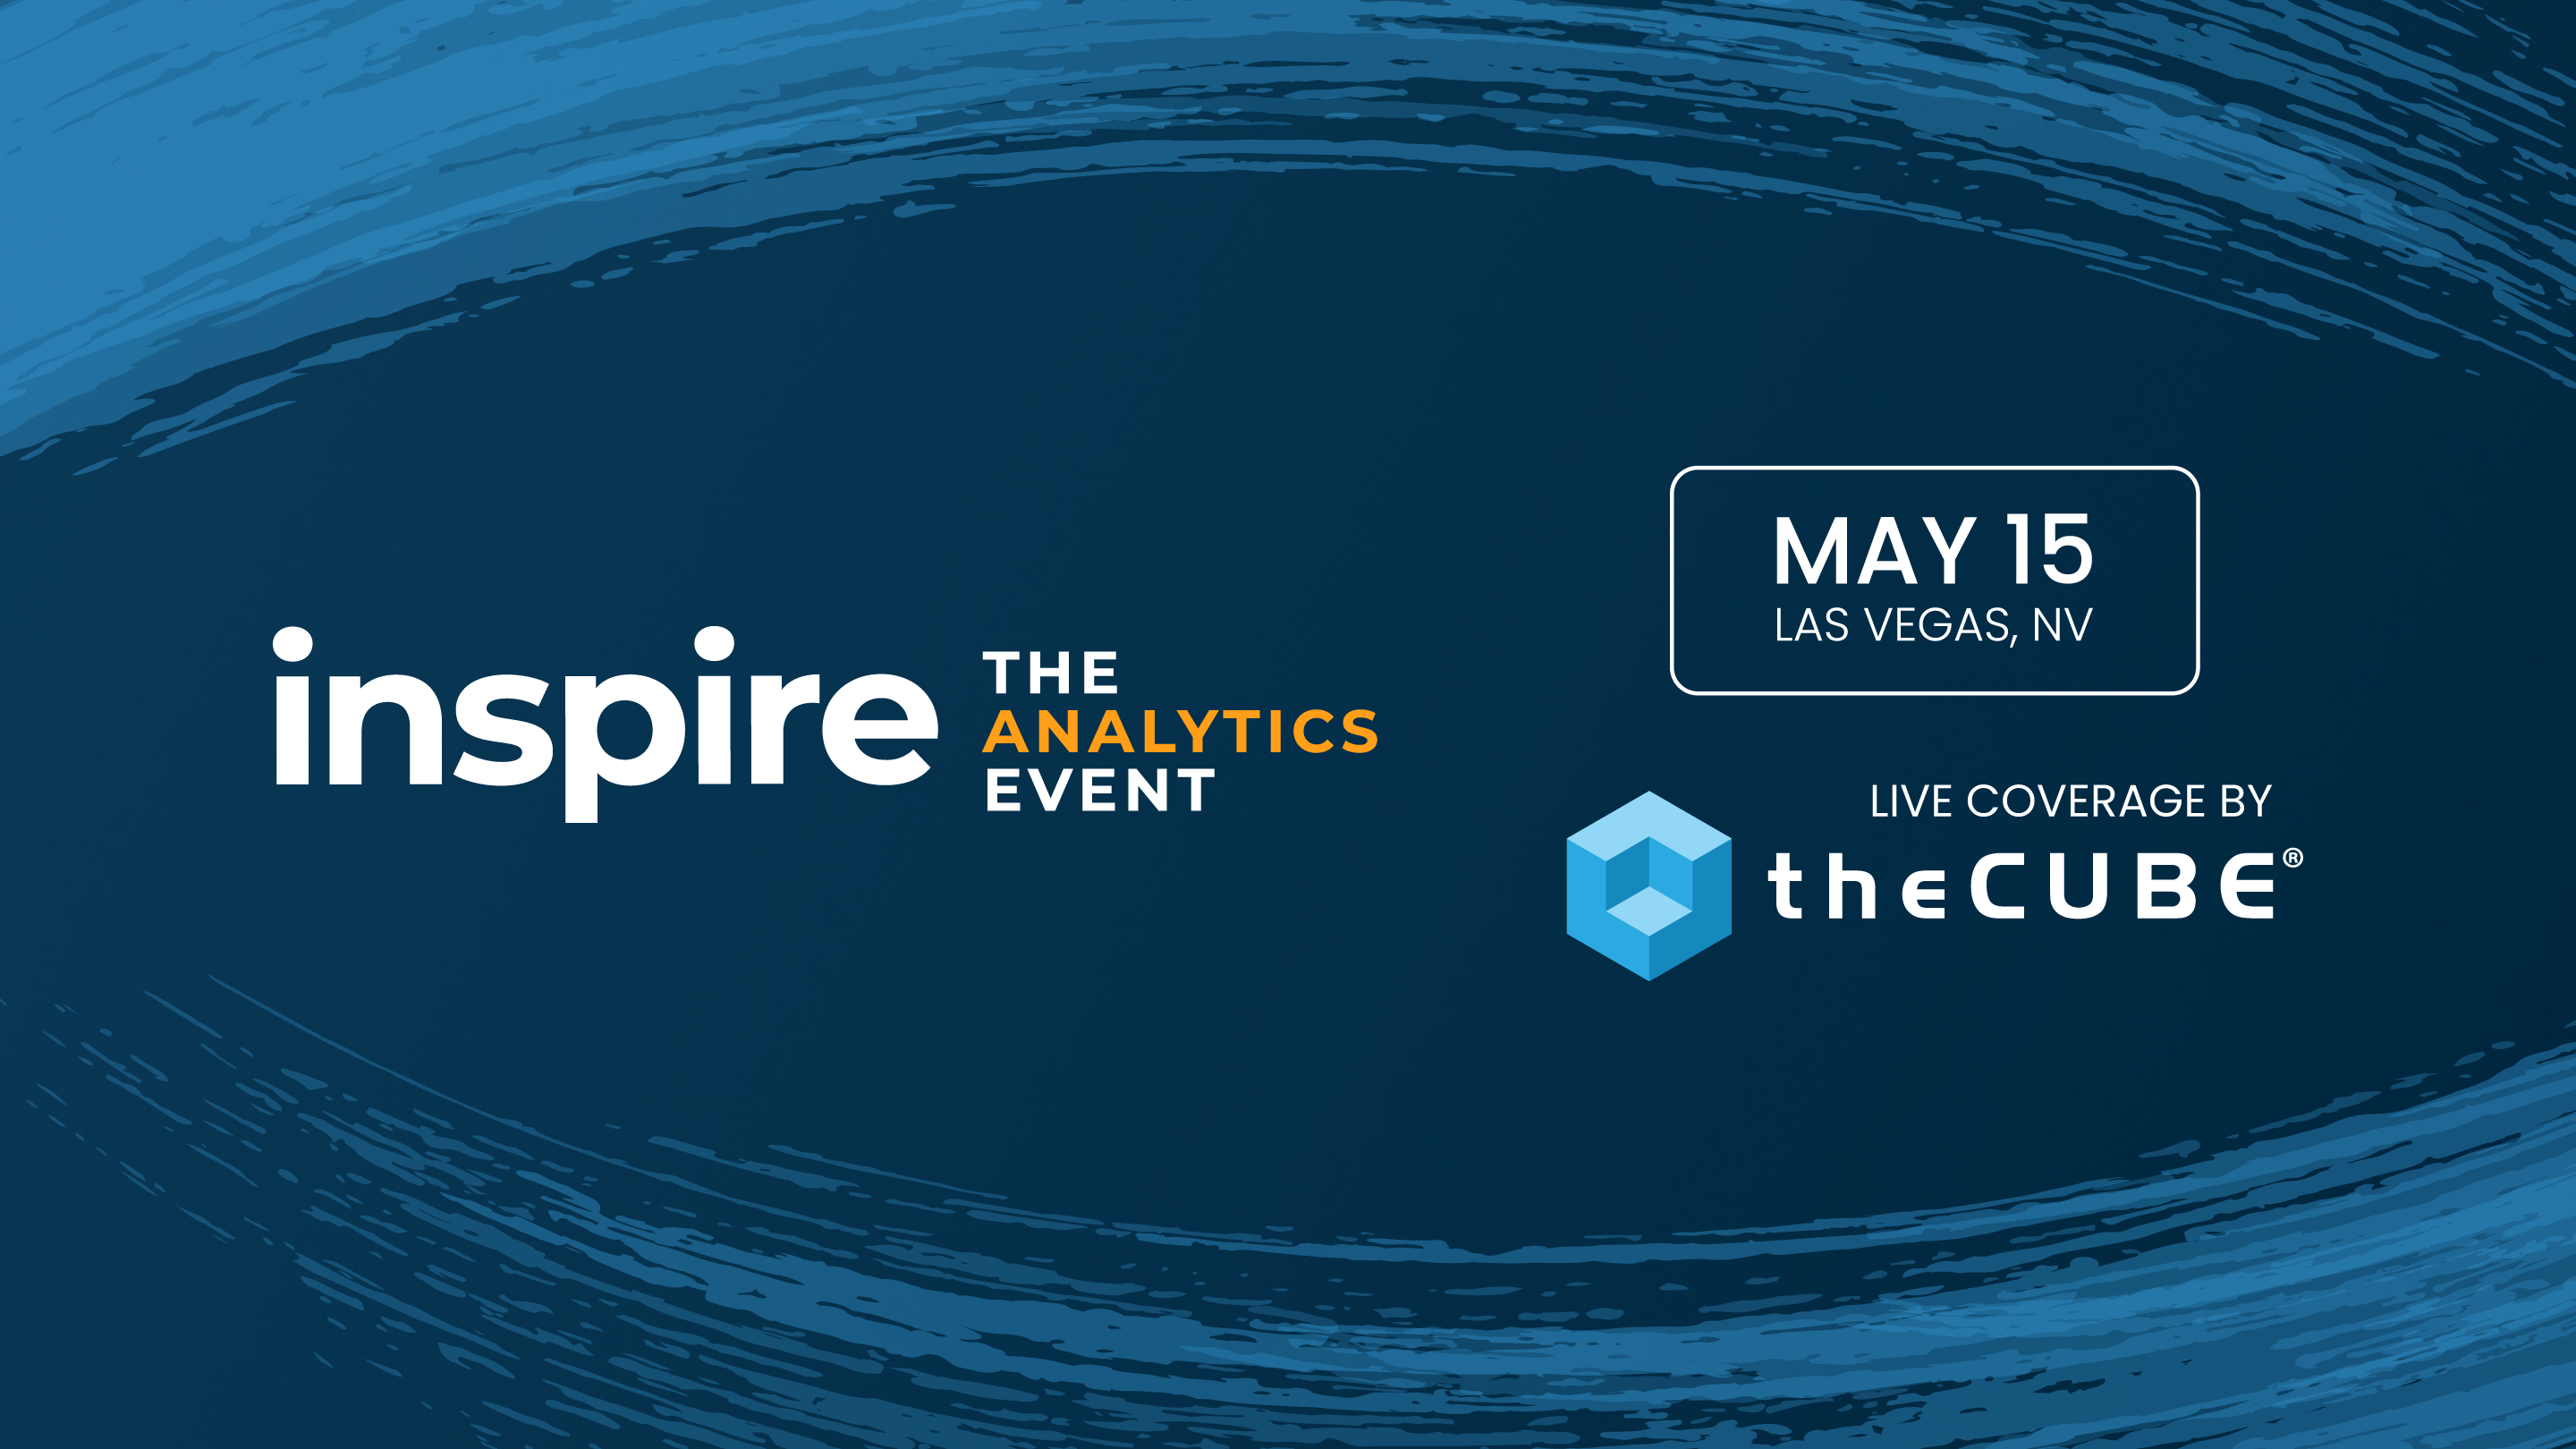 What to expect during the “Alteryx Inspire” event: Join theCUBE
May 15